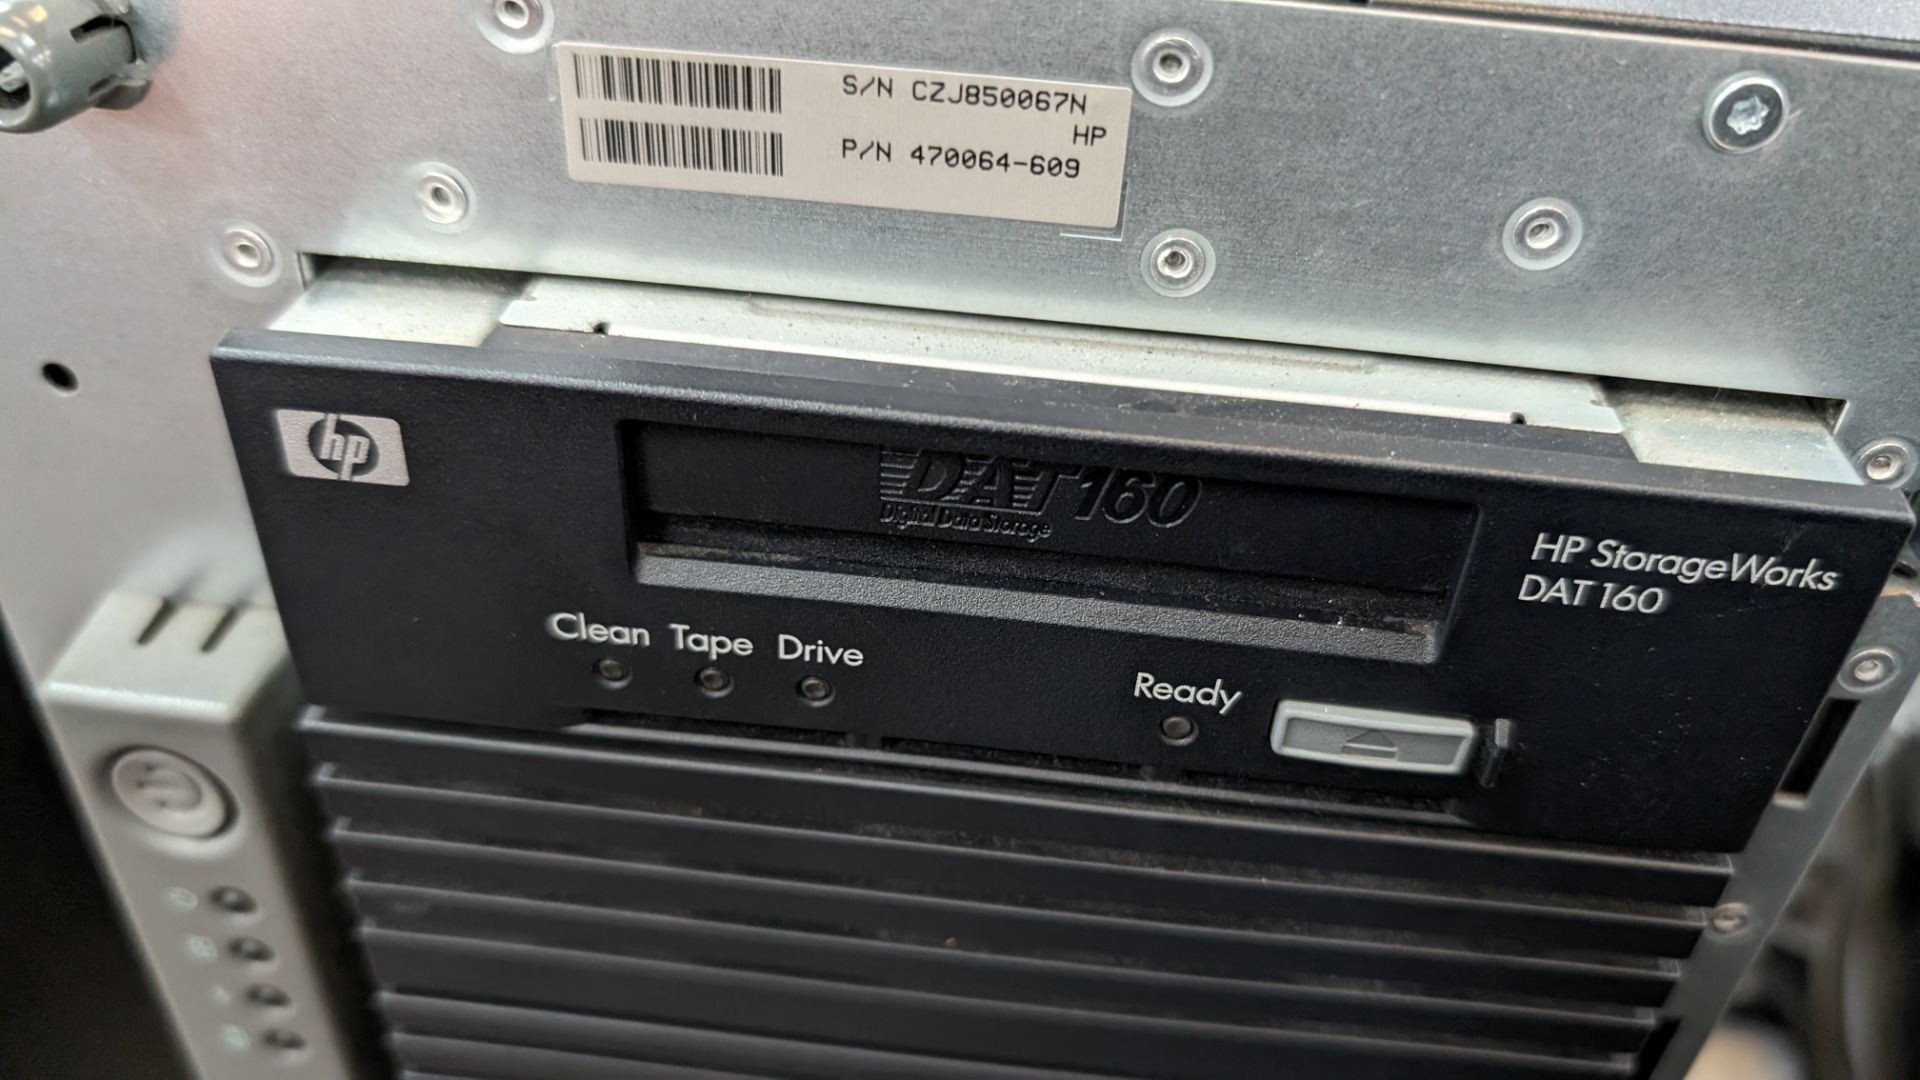 HP server incorporating 2 off hot swap drives, optical drive & HP Storageworks DAT 160 tape drive - Image 6 of 15